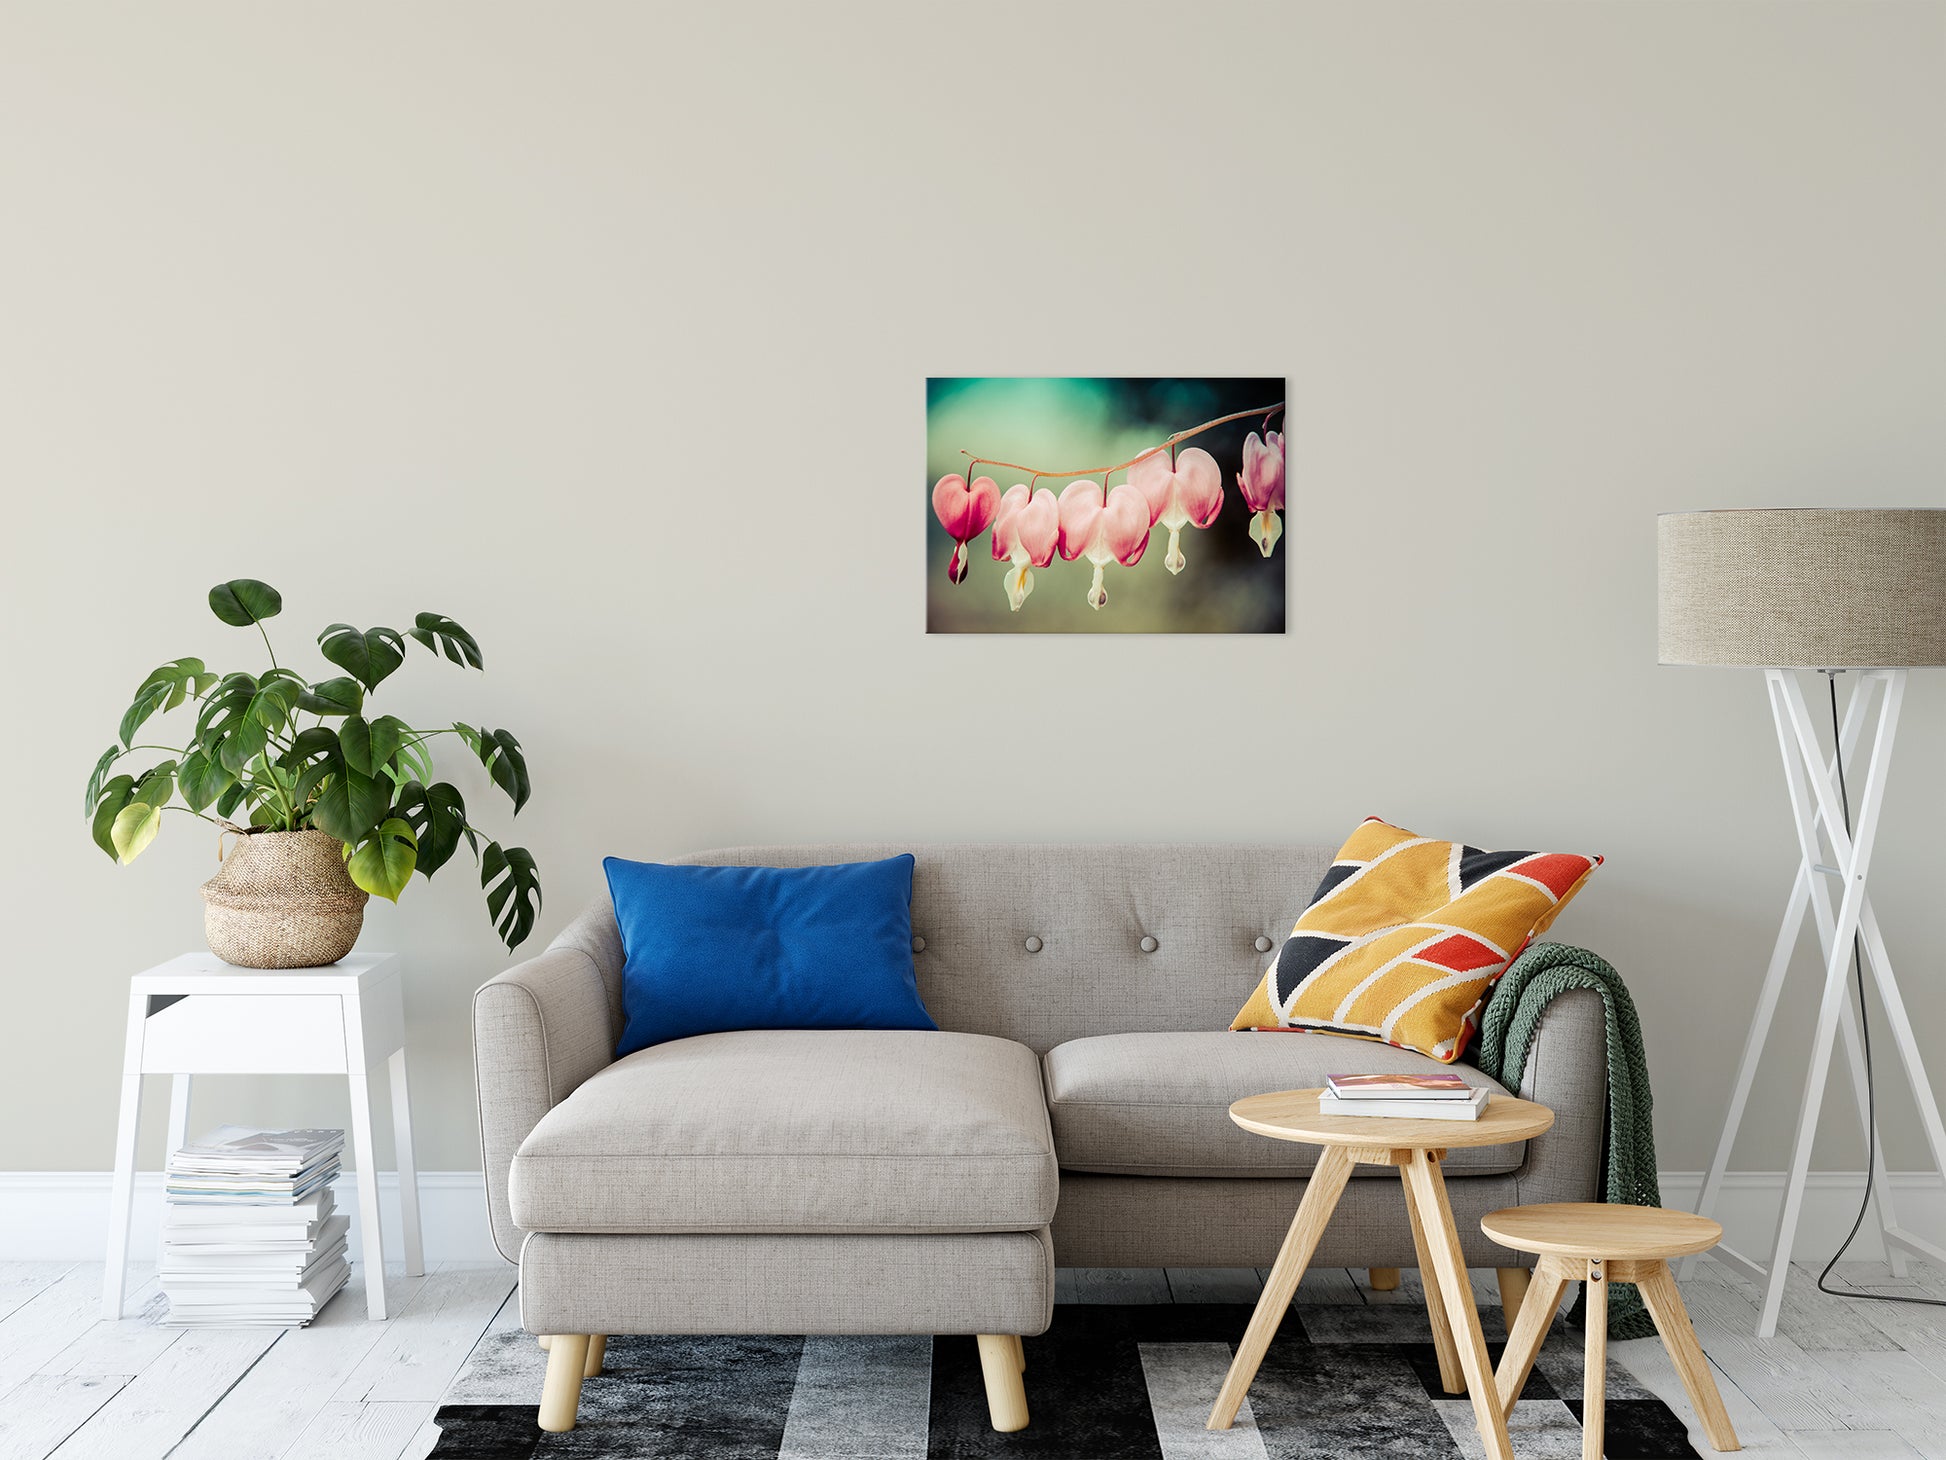 Living Room Canvas Art: Be Still My Bleeding Heart Colorized Nature / Floral Photo Fine Art Canvas Wall Art Prints 20" x 24" - PIPAFINEART